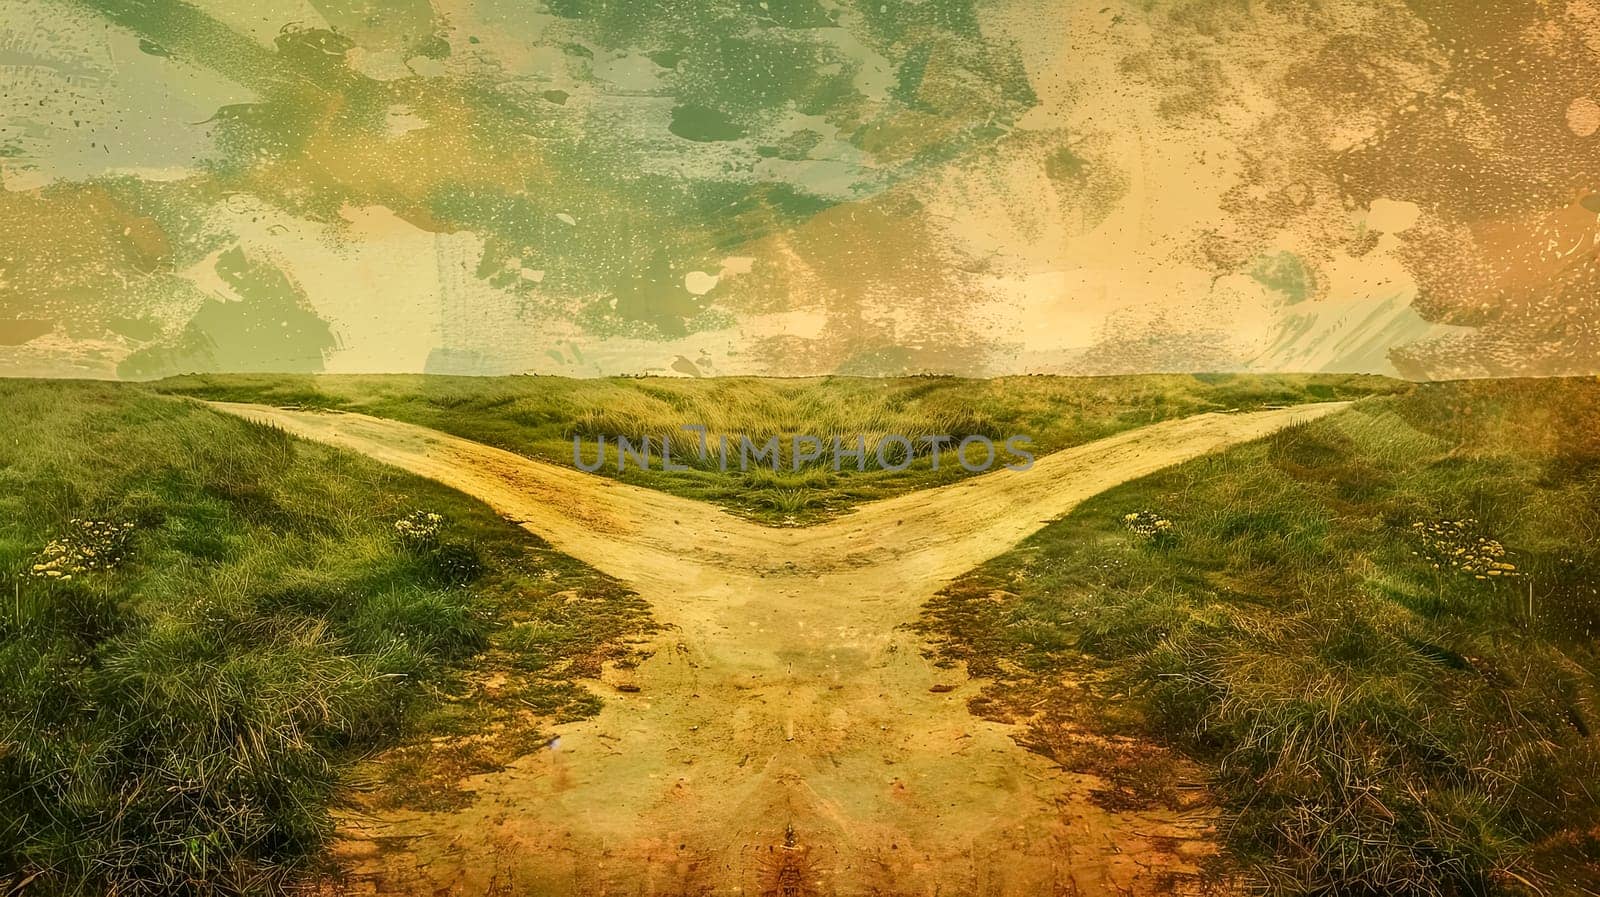 A grunge textured photograph of a split pathway in a serene field